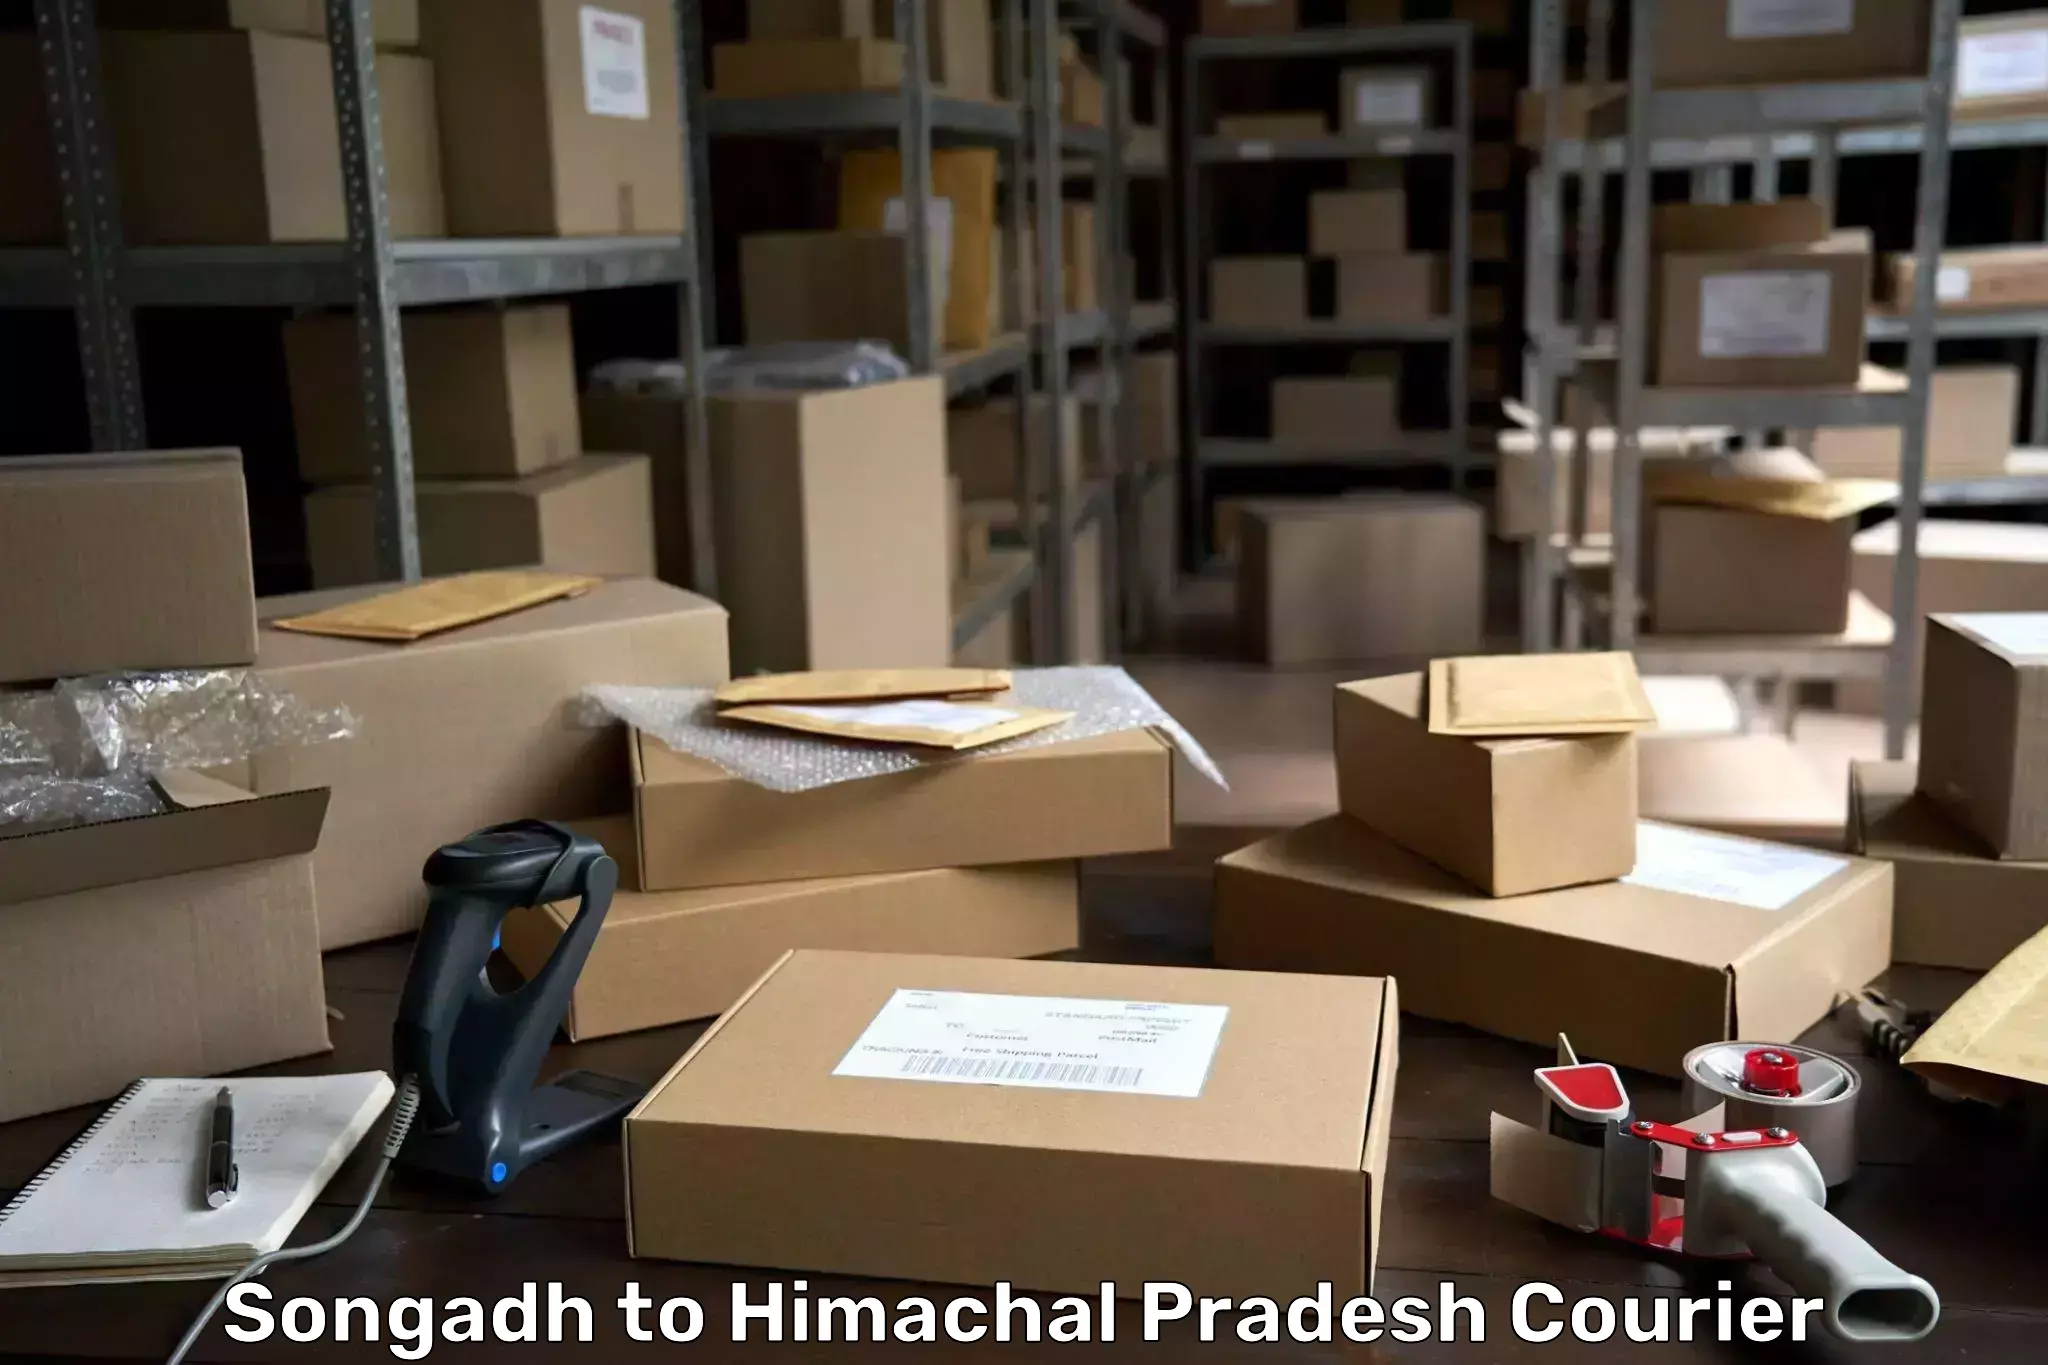 Round-the-clock parcel delivery Songadh to Himachal Pradesh